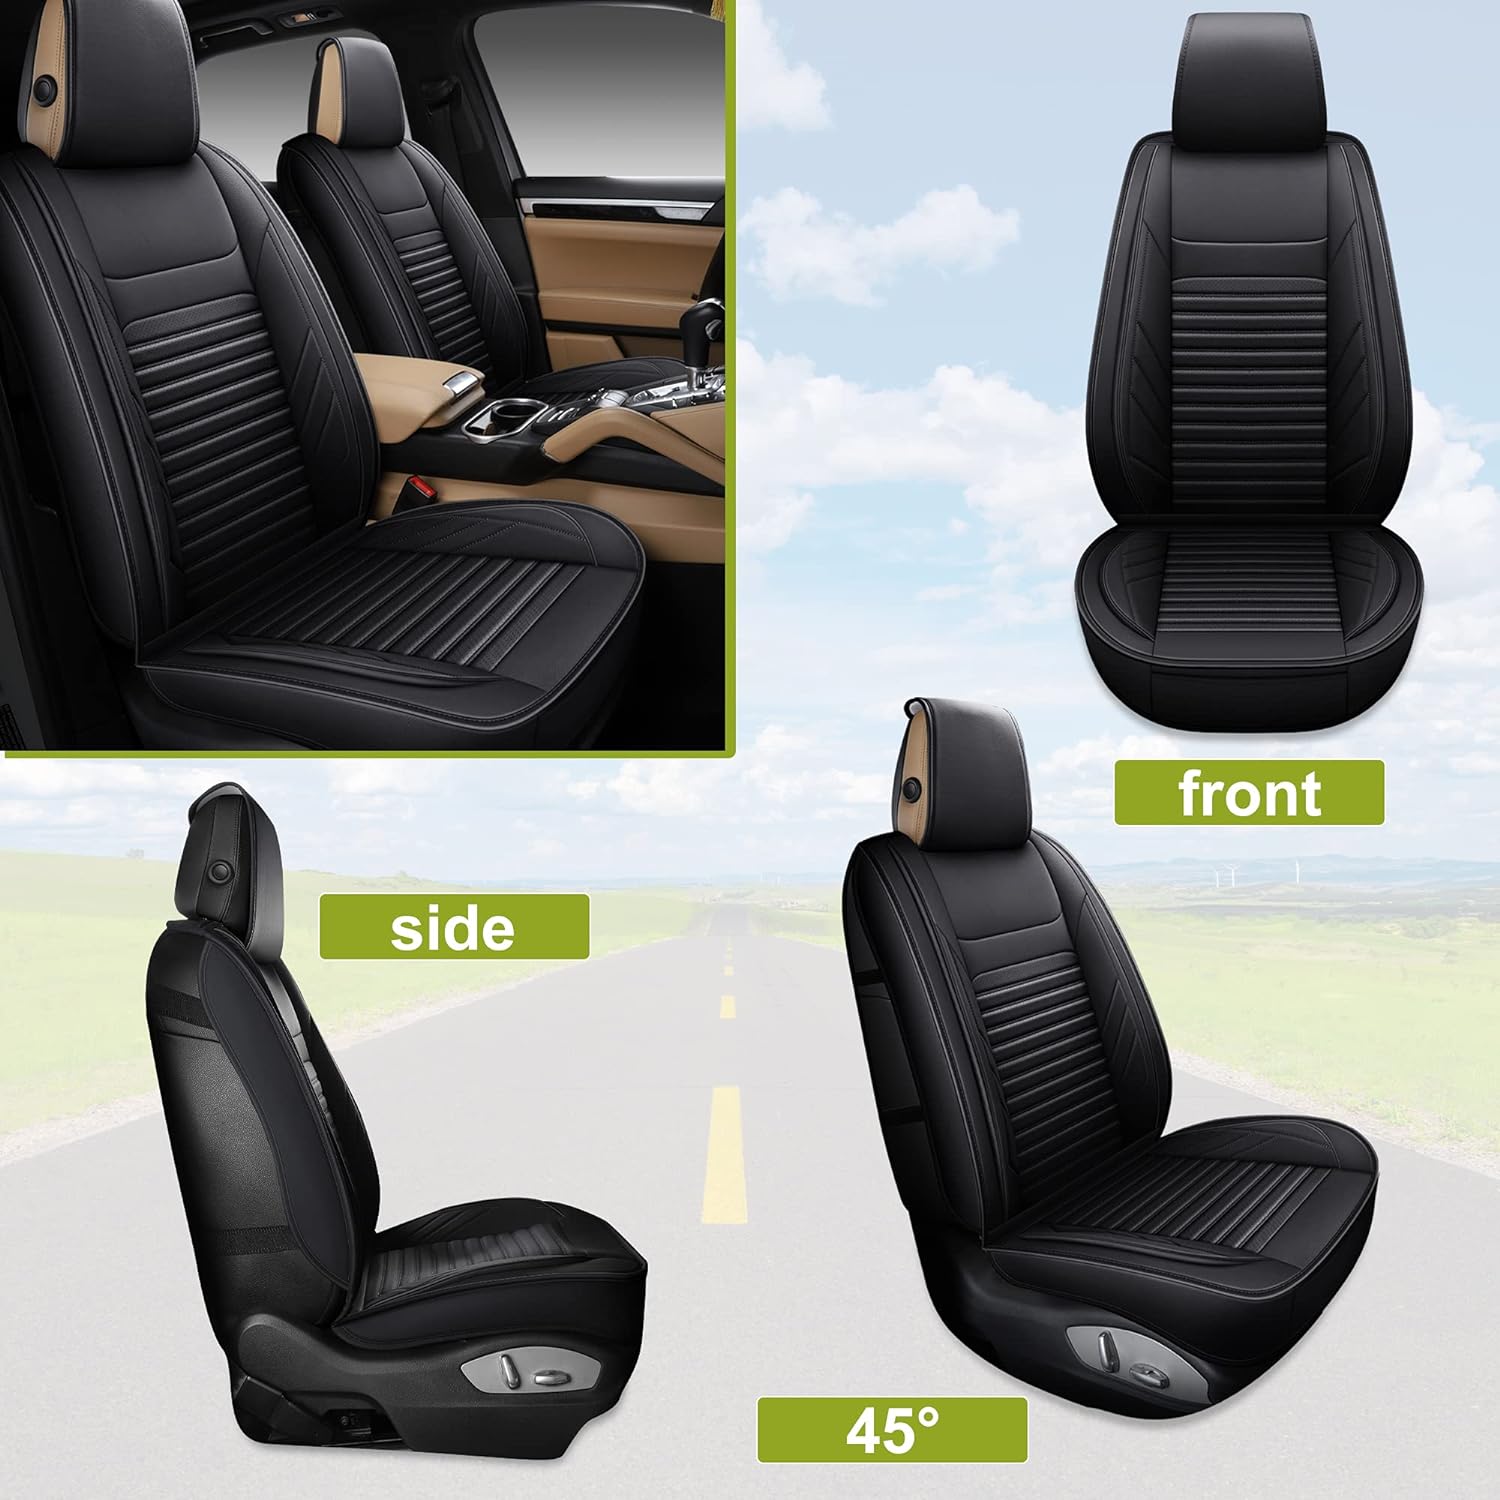 Front Pair AOOG Leather Car Seat Covers Non-Slip Vehicle Car Seat Covers Universal Fit Set for Auto Interior Accessories Black&Blue Leatherette Automotive Seat Covers for Cars SUV Pick-up Truck 